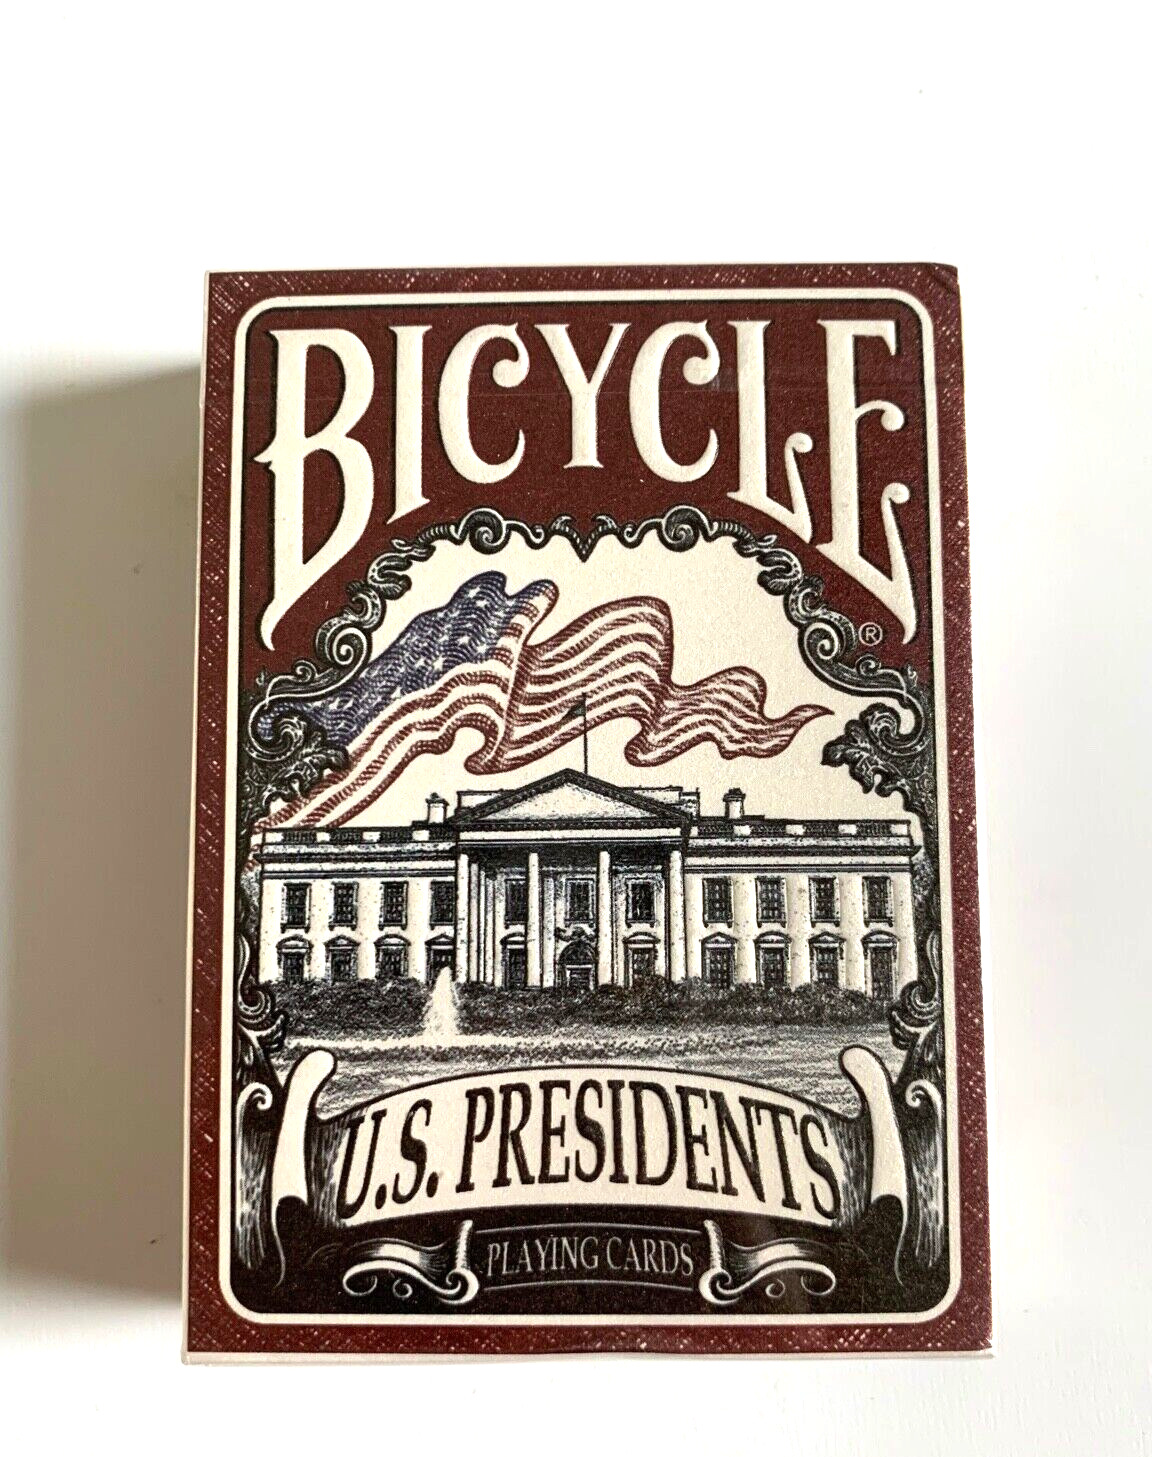 Bicycle U.S Presidents Playing Cards Sealed